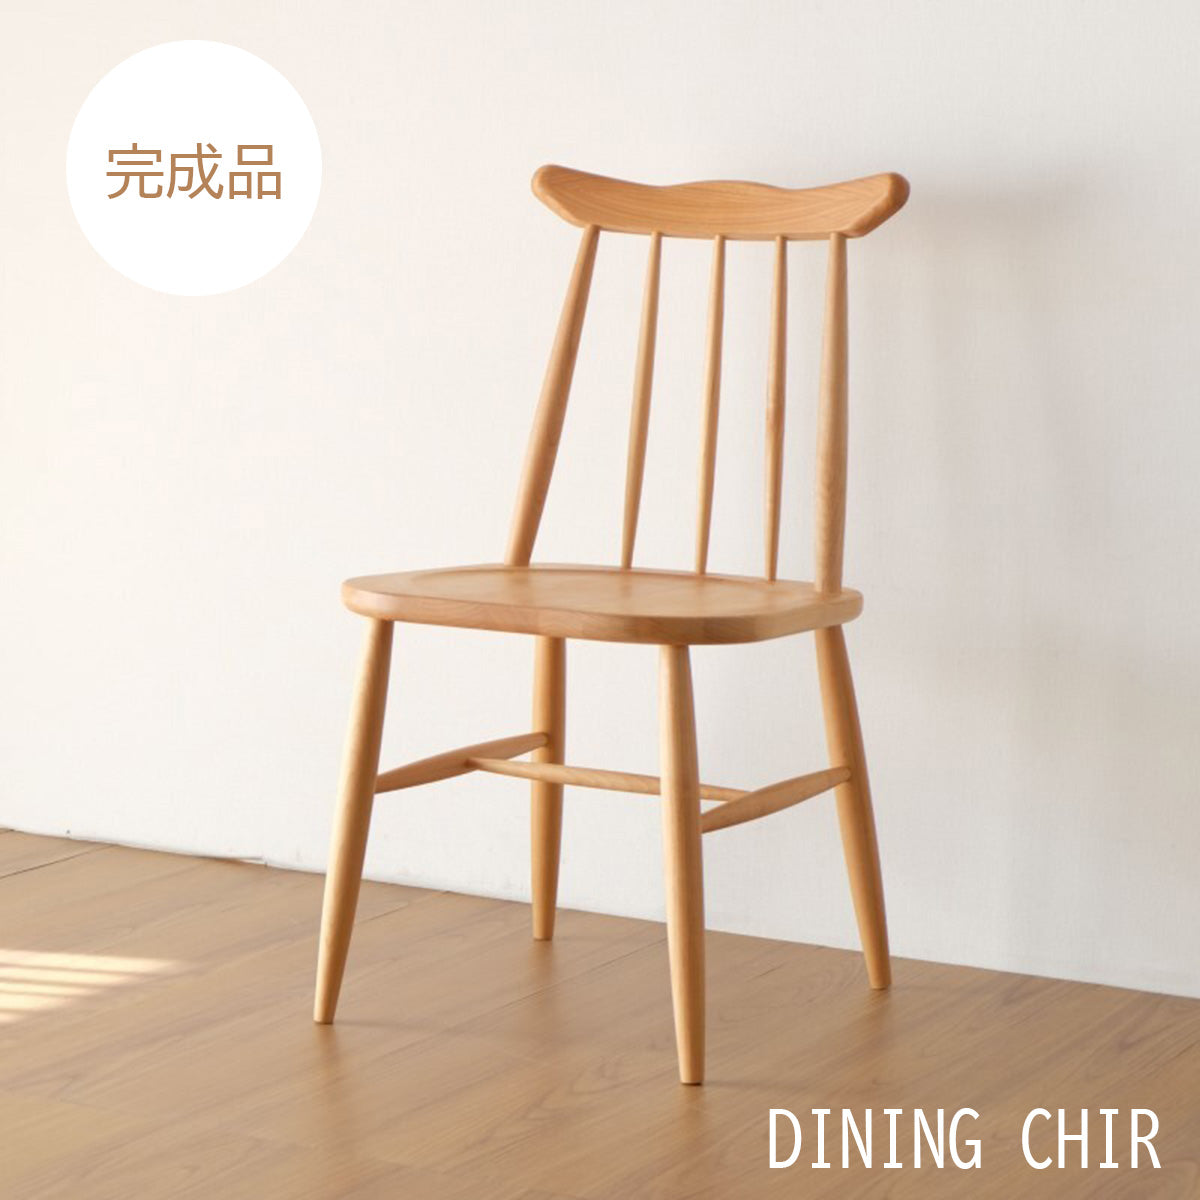 NORN DINING CHAIR　ダイニングチェア　幅43.3